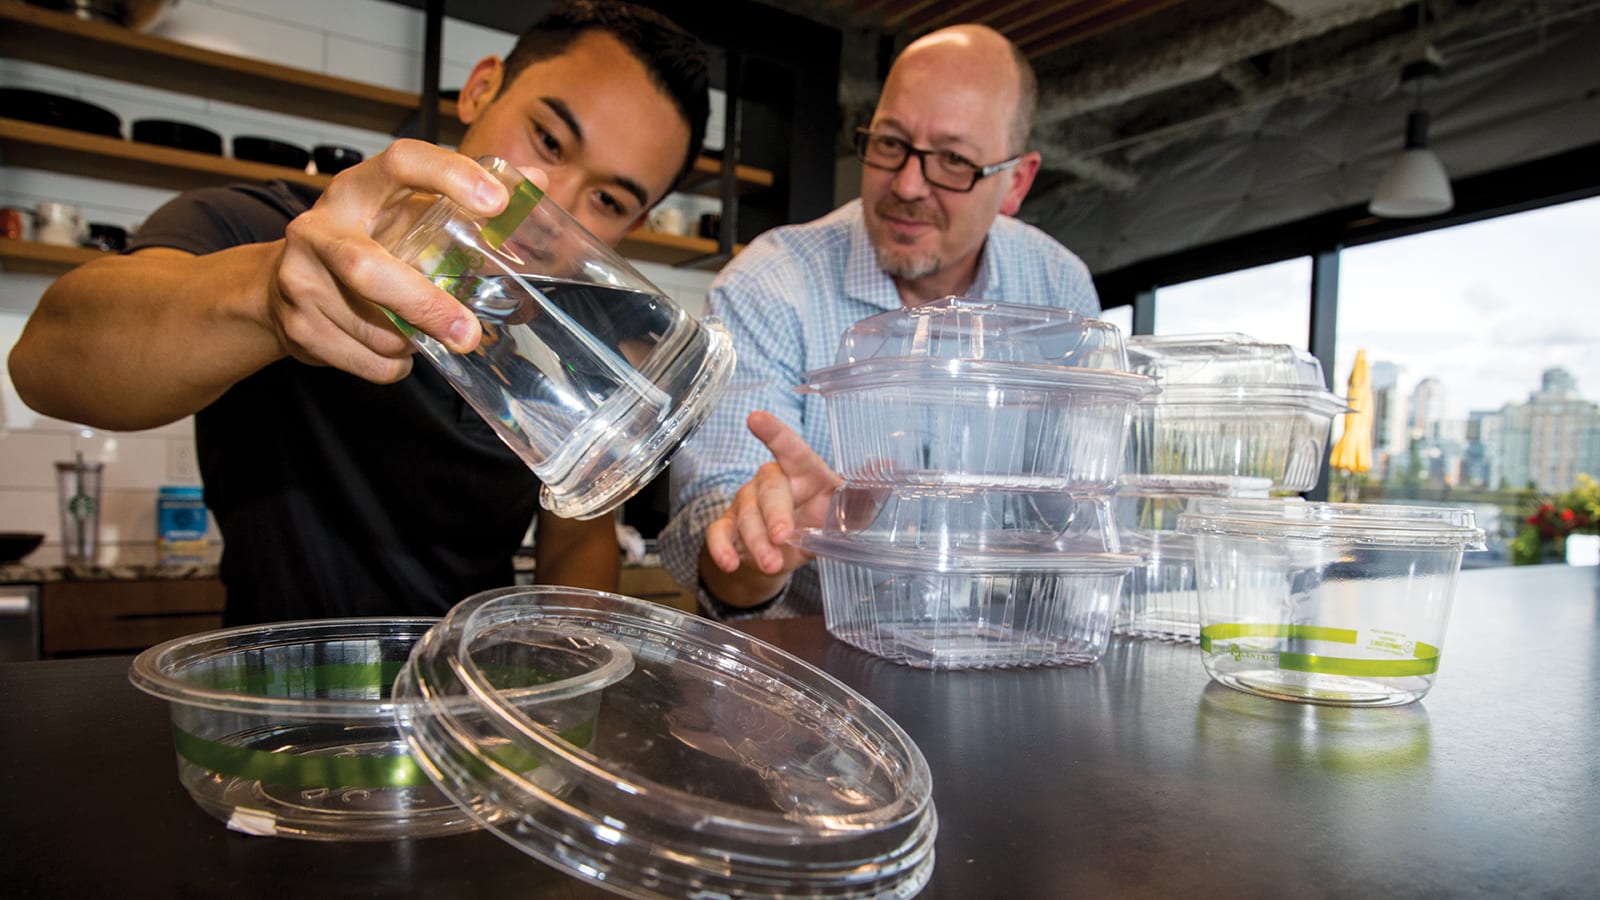 PCC’s senior sustainability specialist, Brent Kawamura, and senior deli merchandiser, Tracy Marik, analyze lid closure performance on new sustainable packaging options to check for leakage.